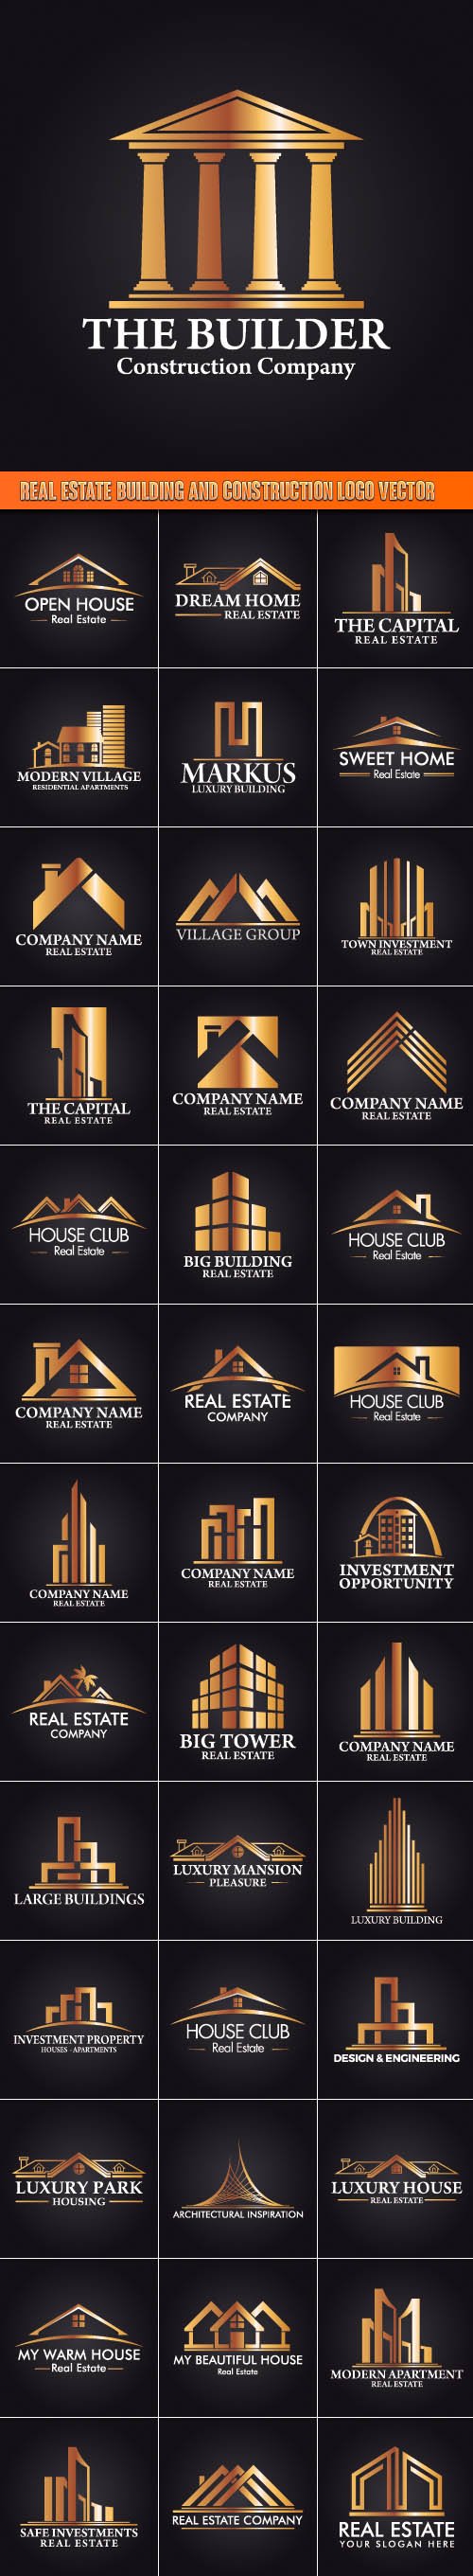 Real Estate Building and Construction Logo Vector